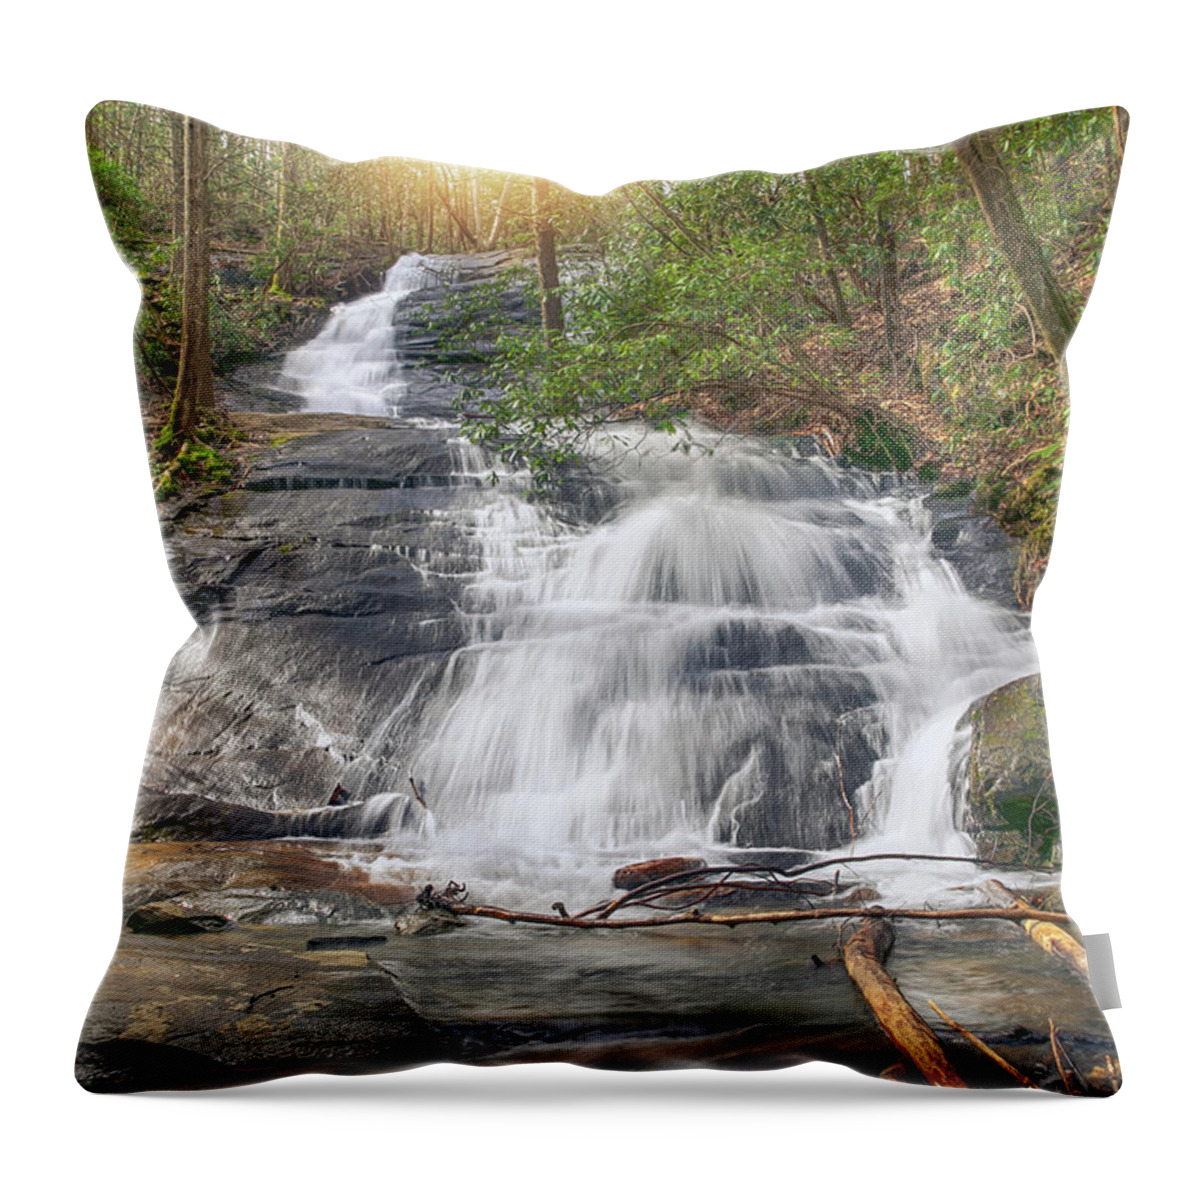  Fall Branch Falls Throw Pillow featuring the photograph Fall Branch Falls by Anna Rumiantseva